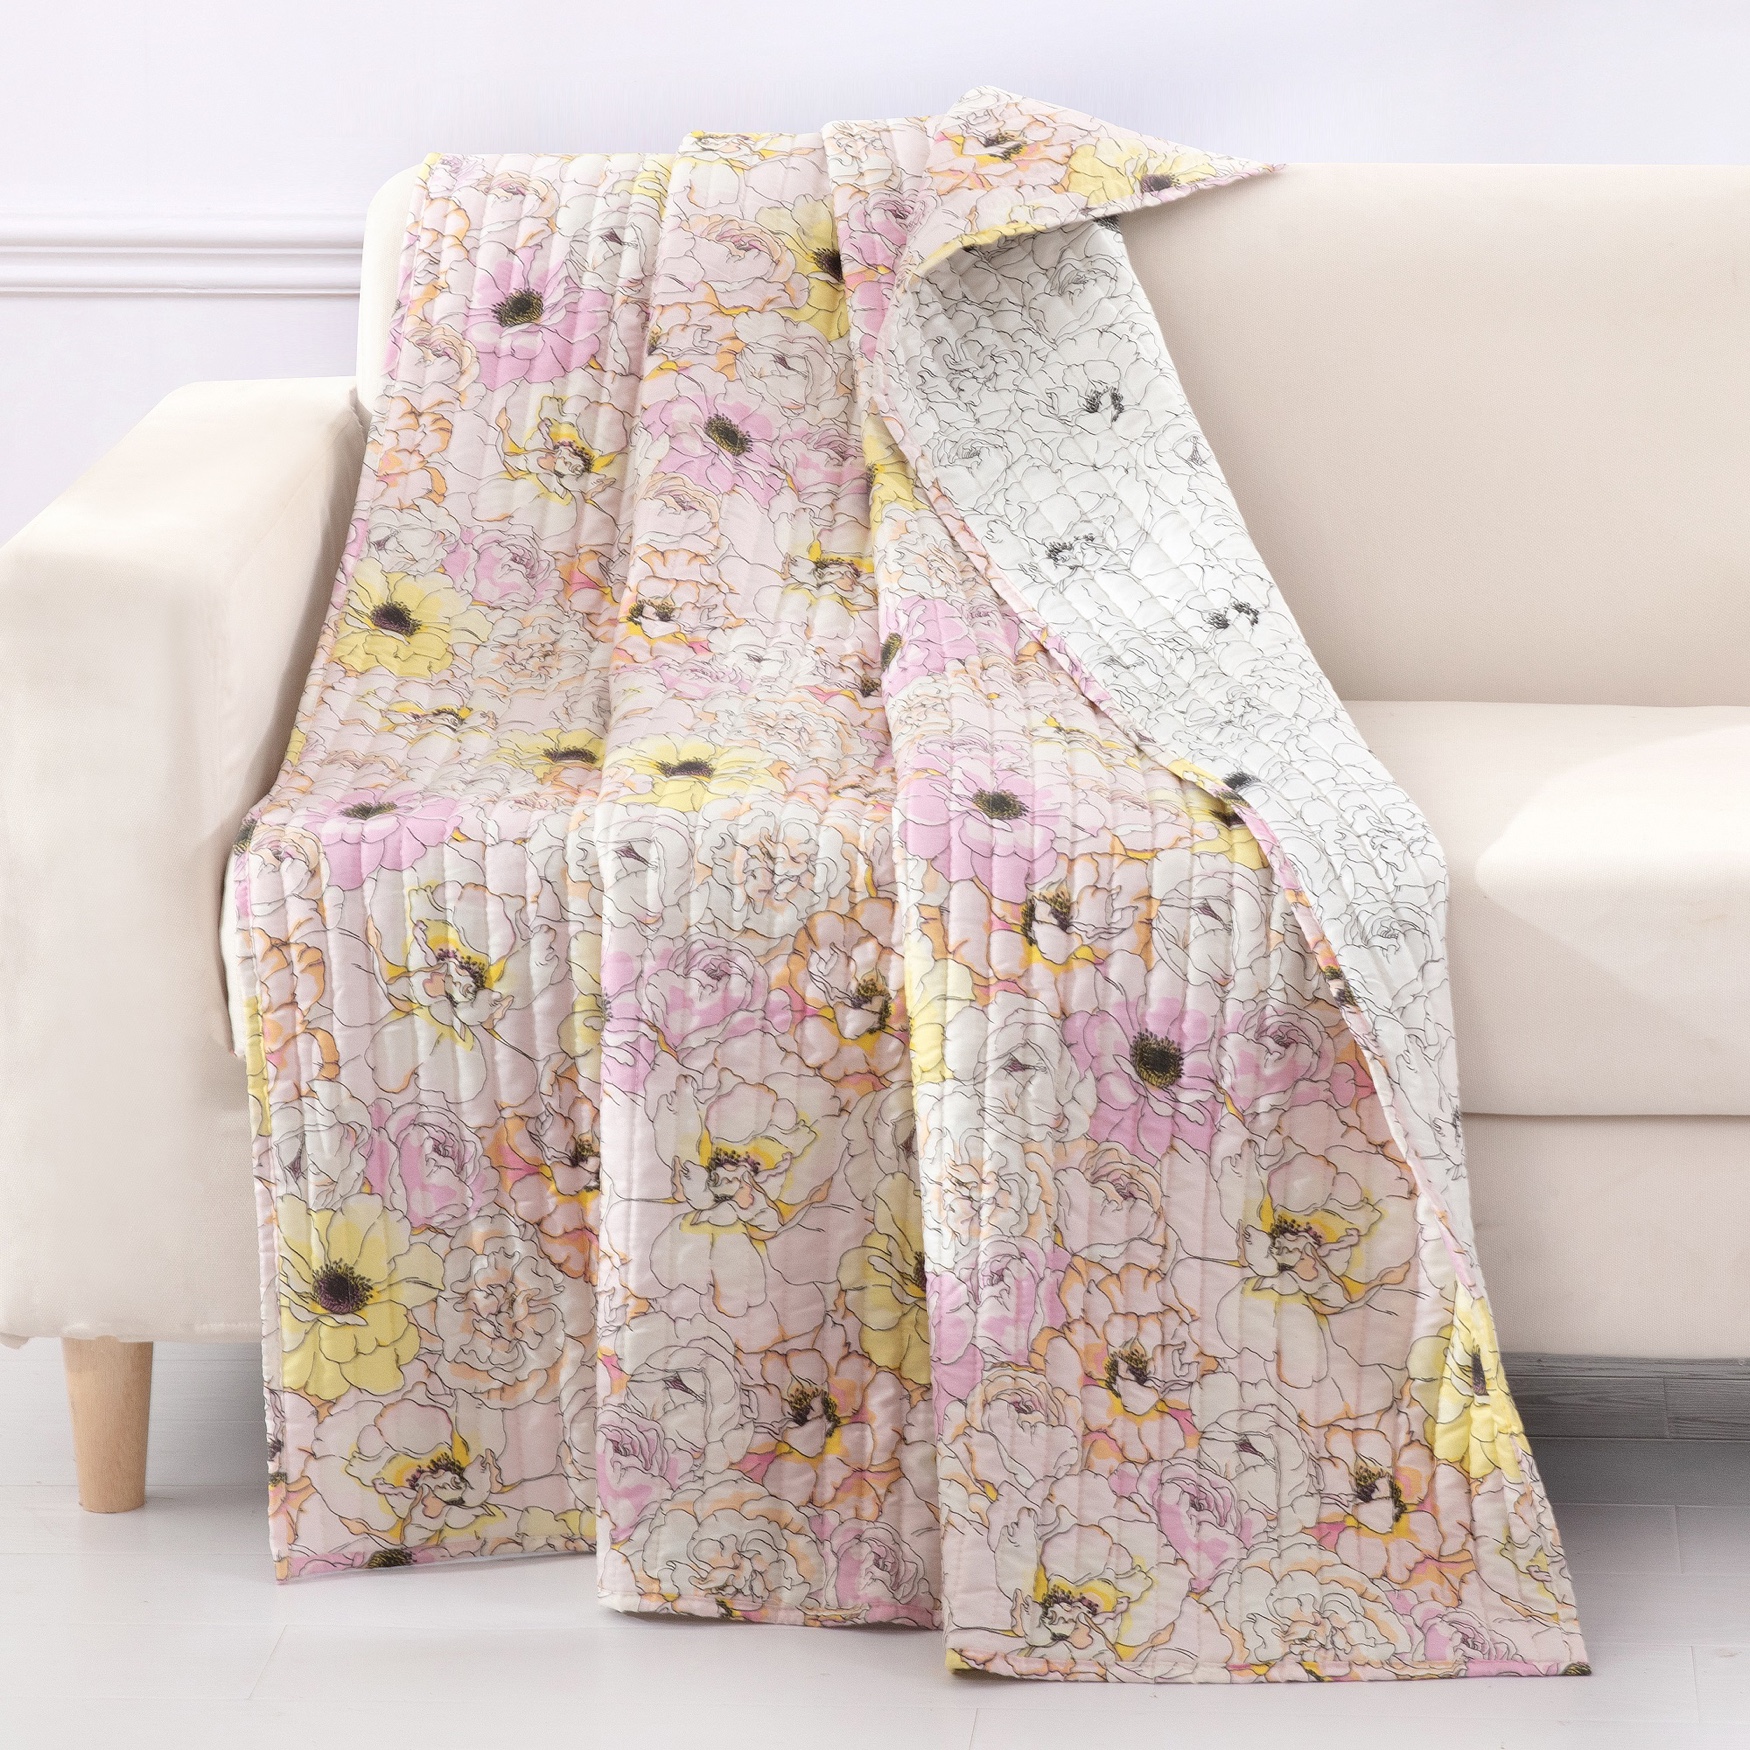 Misty Bloom Quilted Throw Blanket, PINK